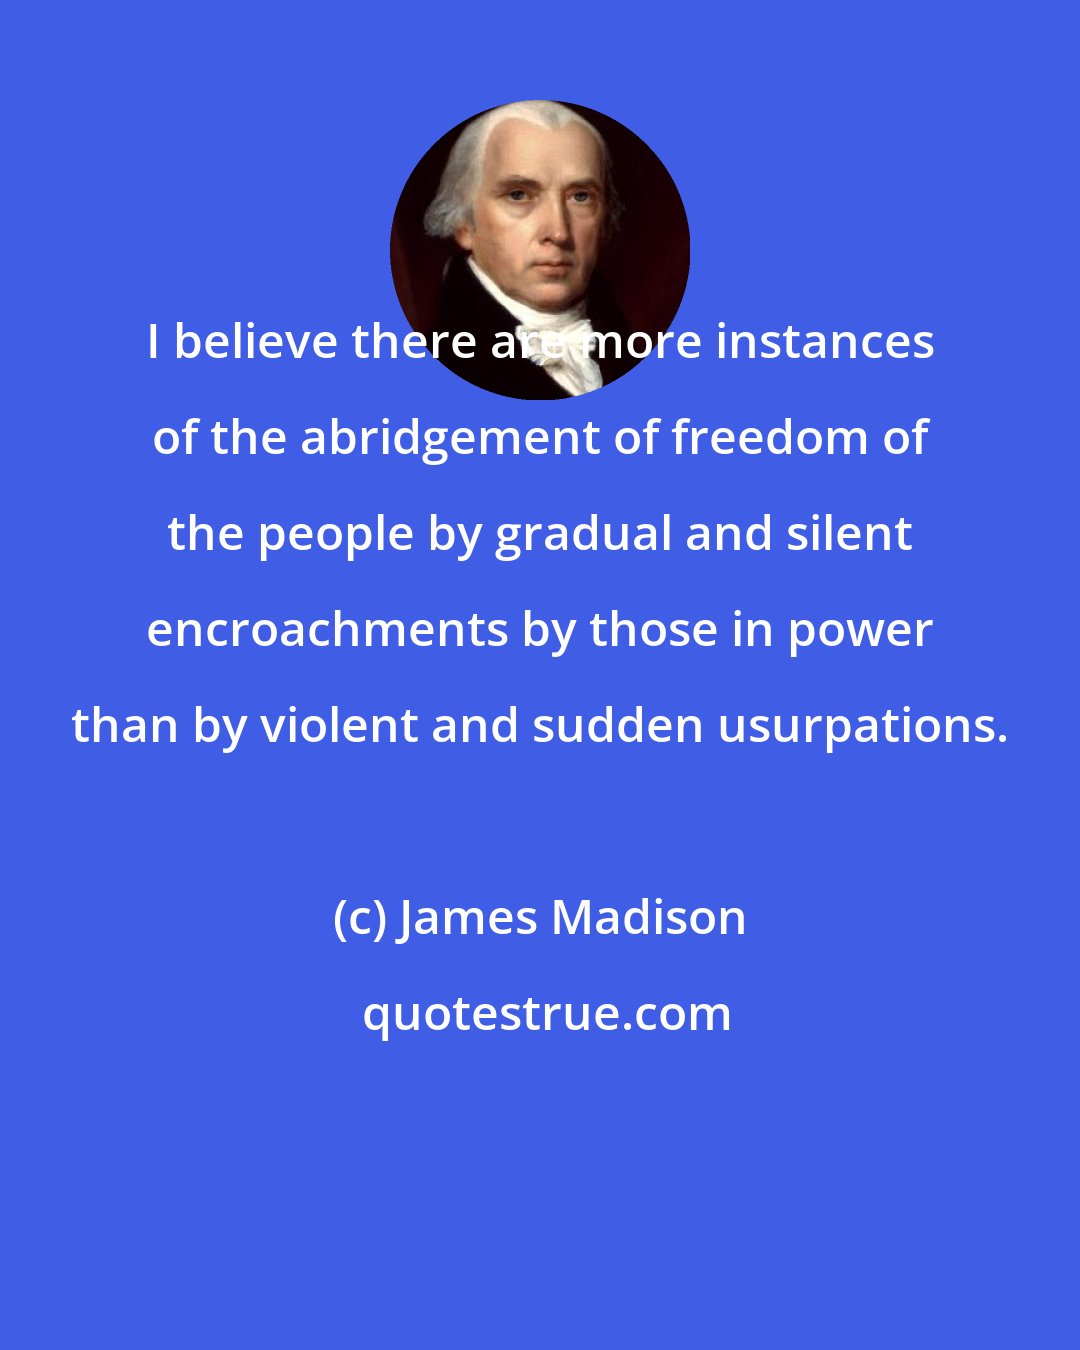 James Madison: I believe there are more instances of the abridgement of freedom of the people by gradual and silent encroachments by those in power than by violent and sudden usurpations.